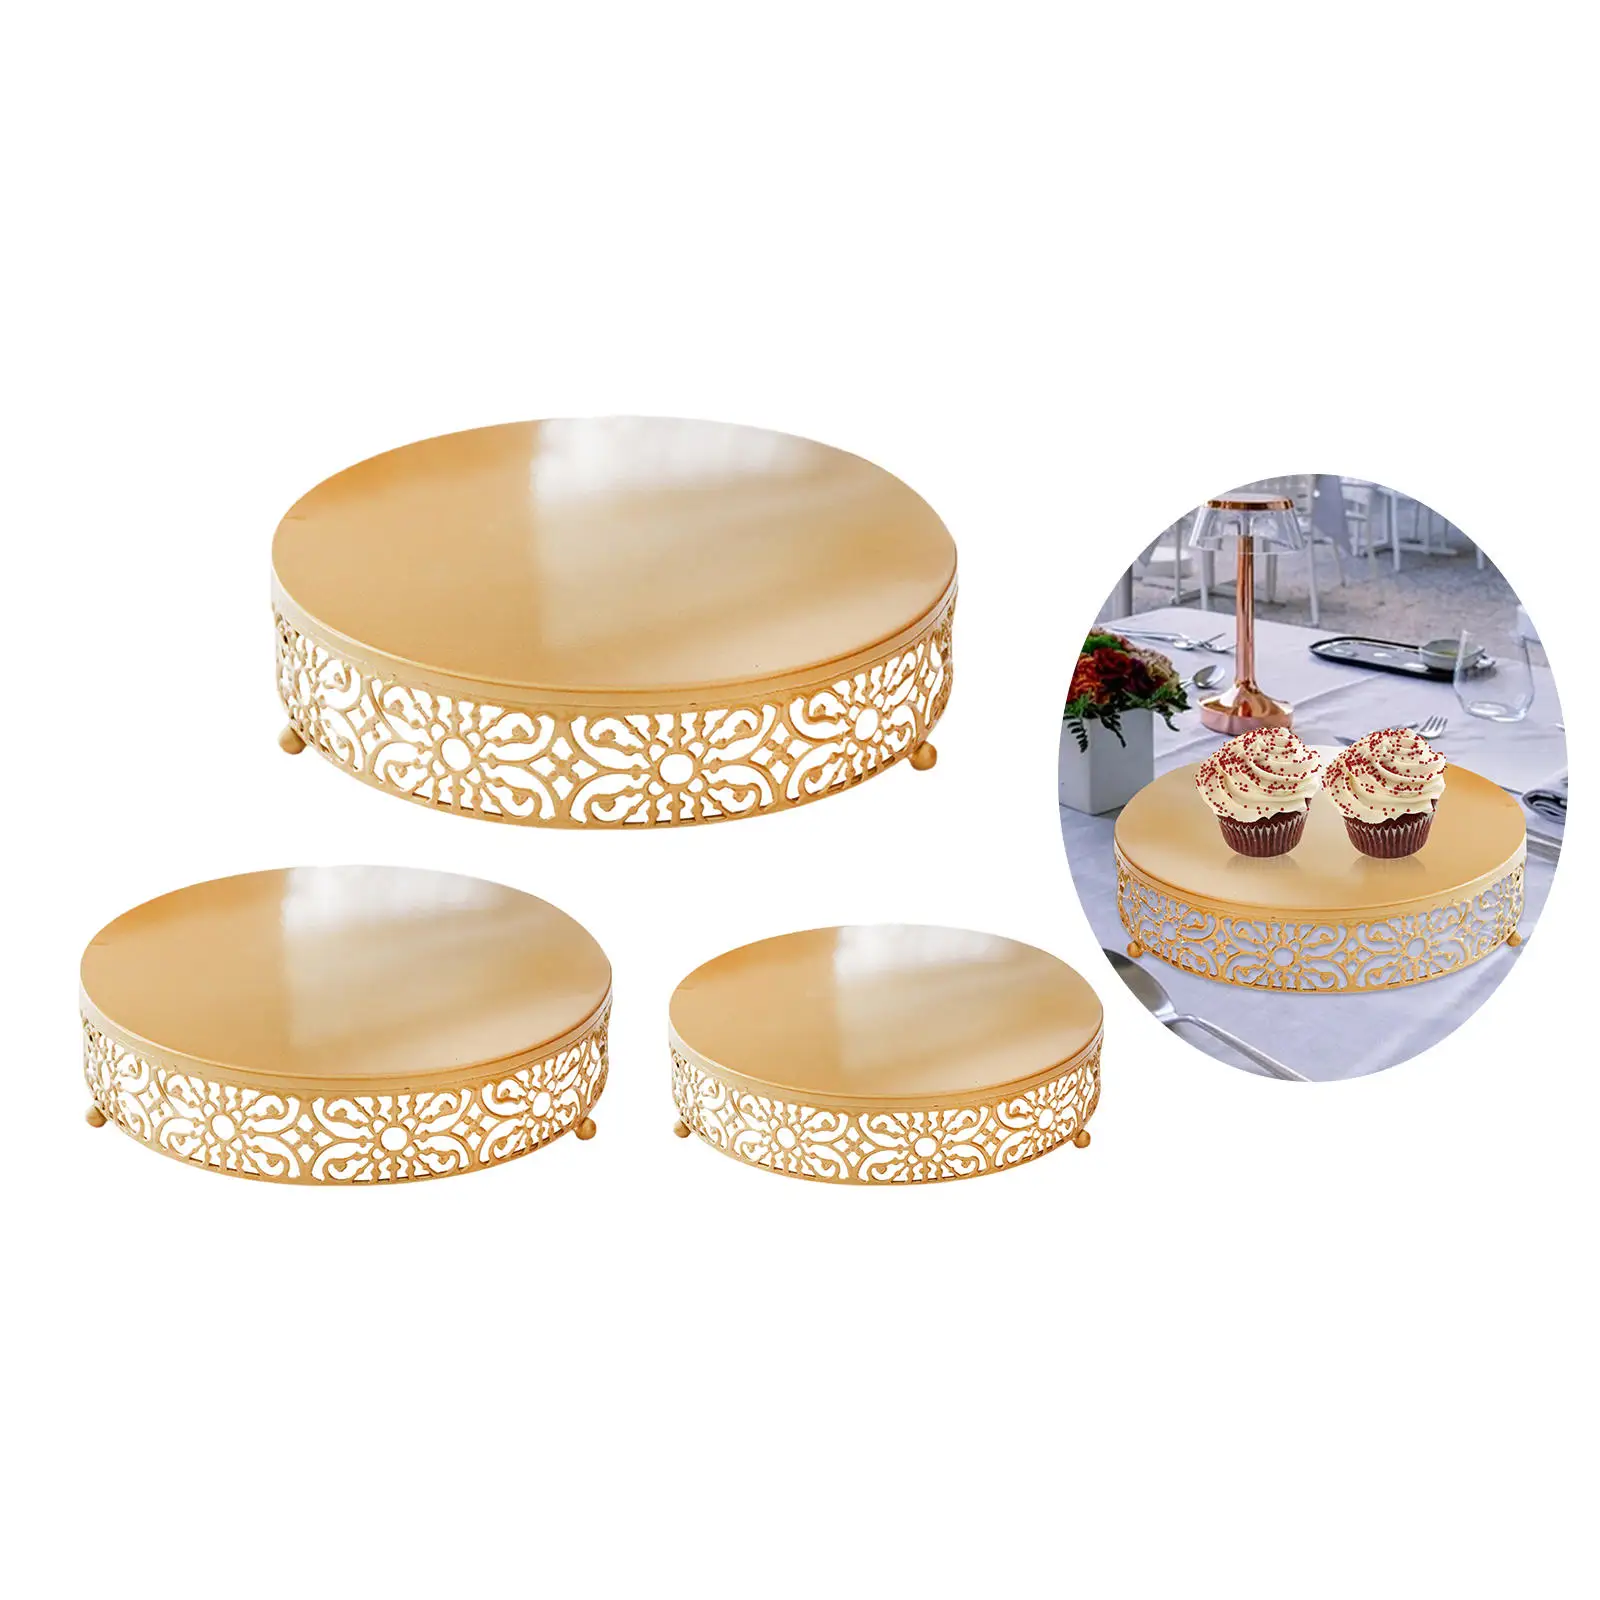 3/Set Luxury Round Cake Stands Dessert Display Plate Pastry Tart Pie Candy Cheese for Decor Event Centrepiece Birthday Home